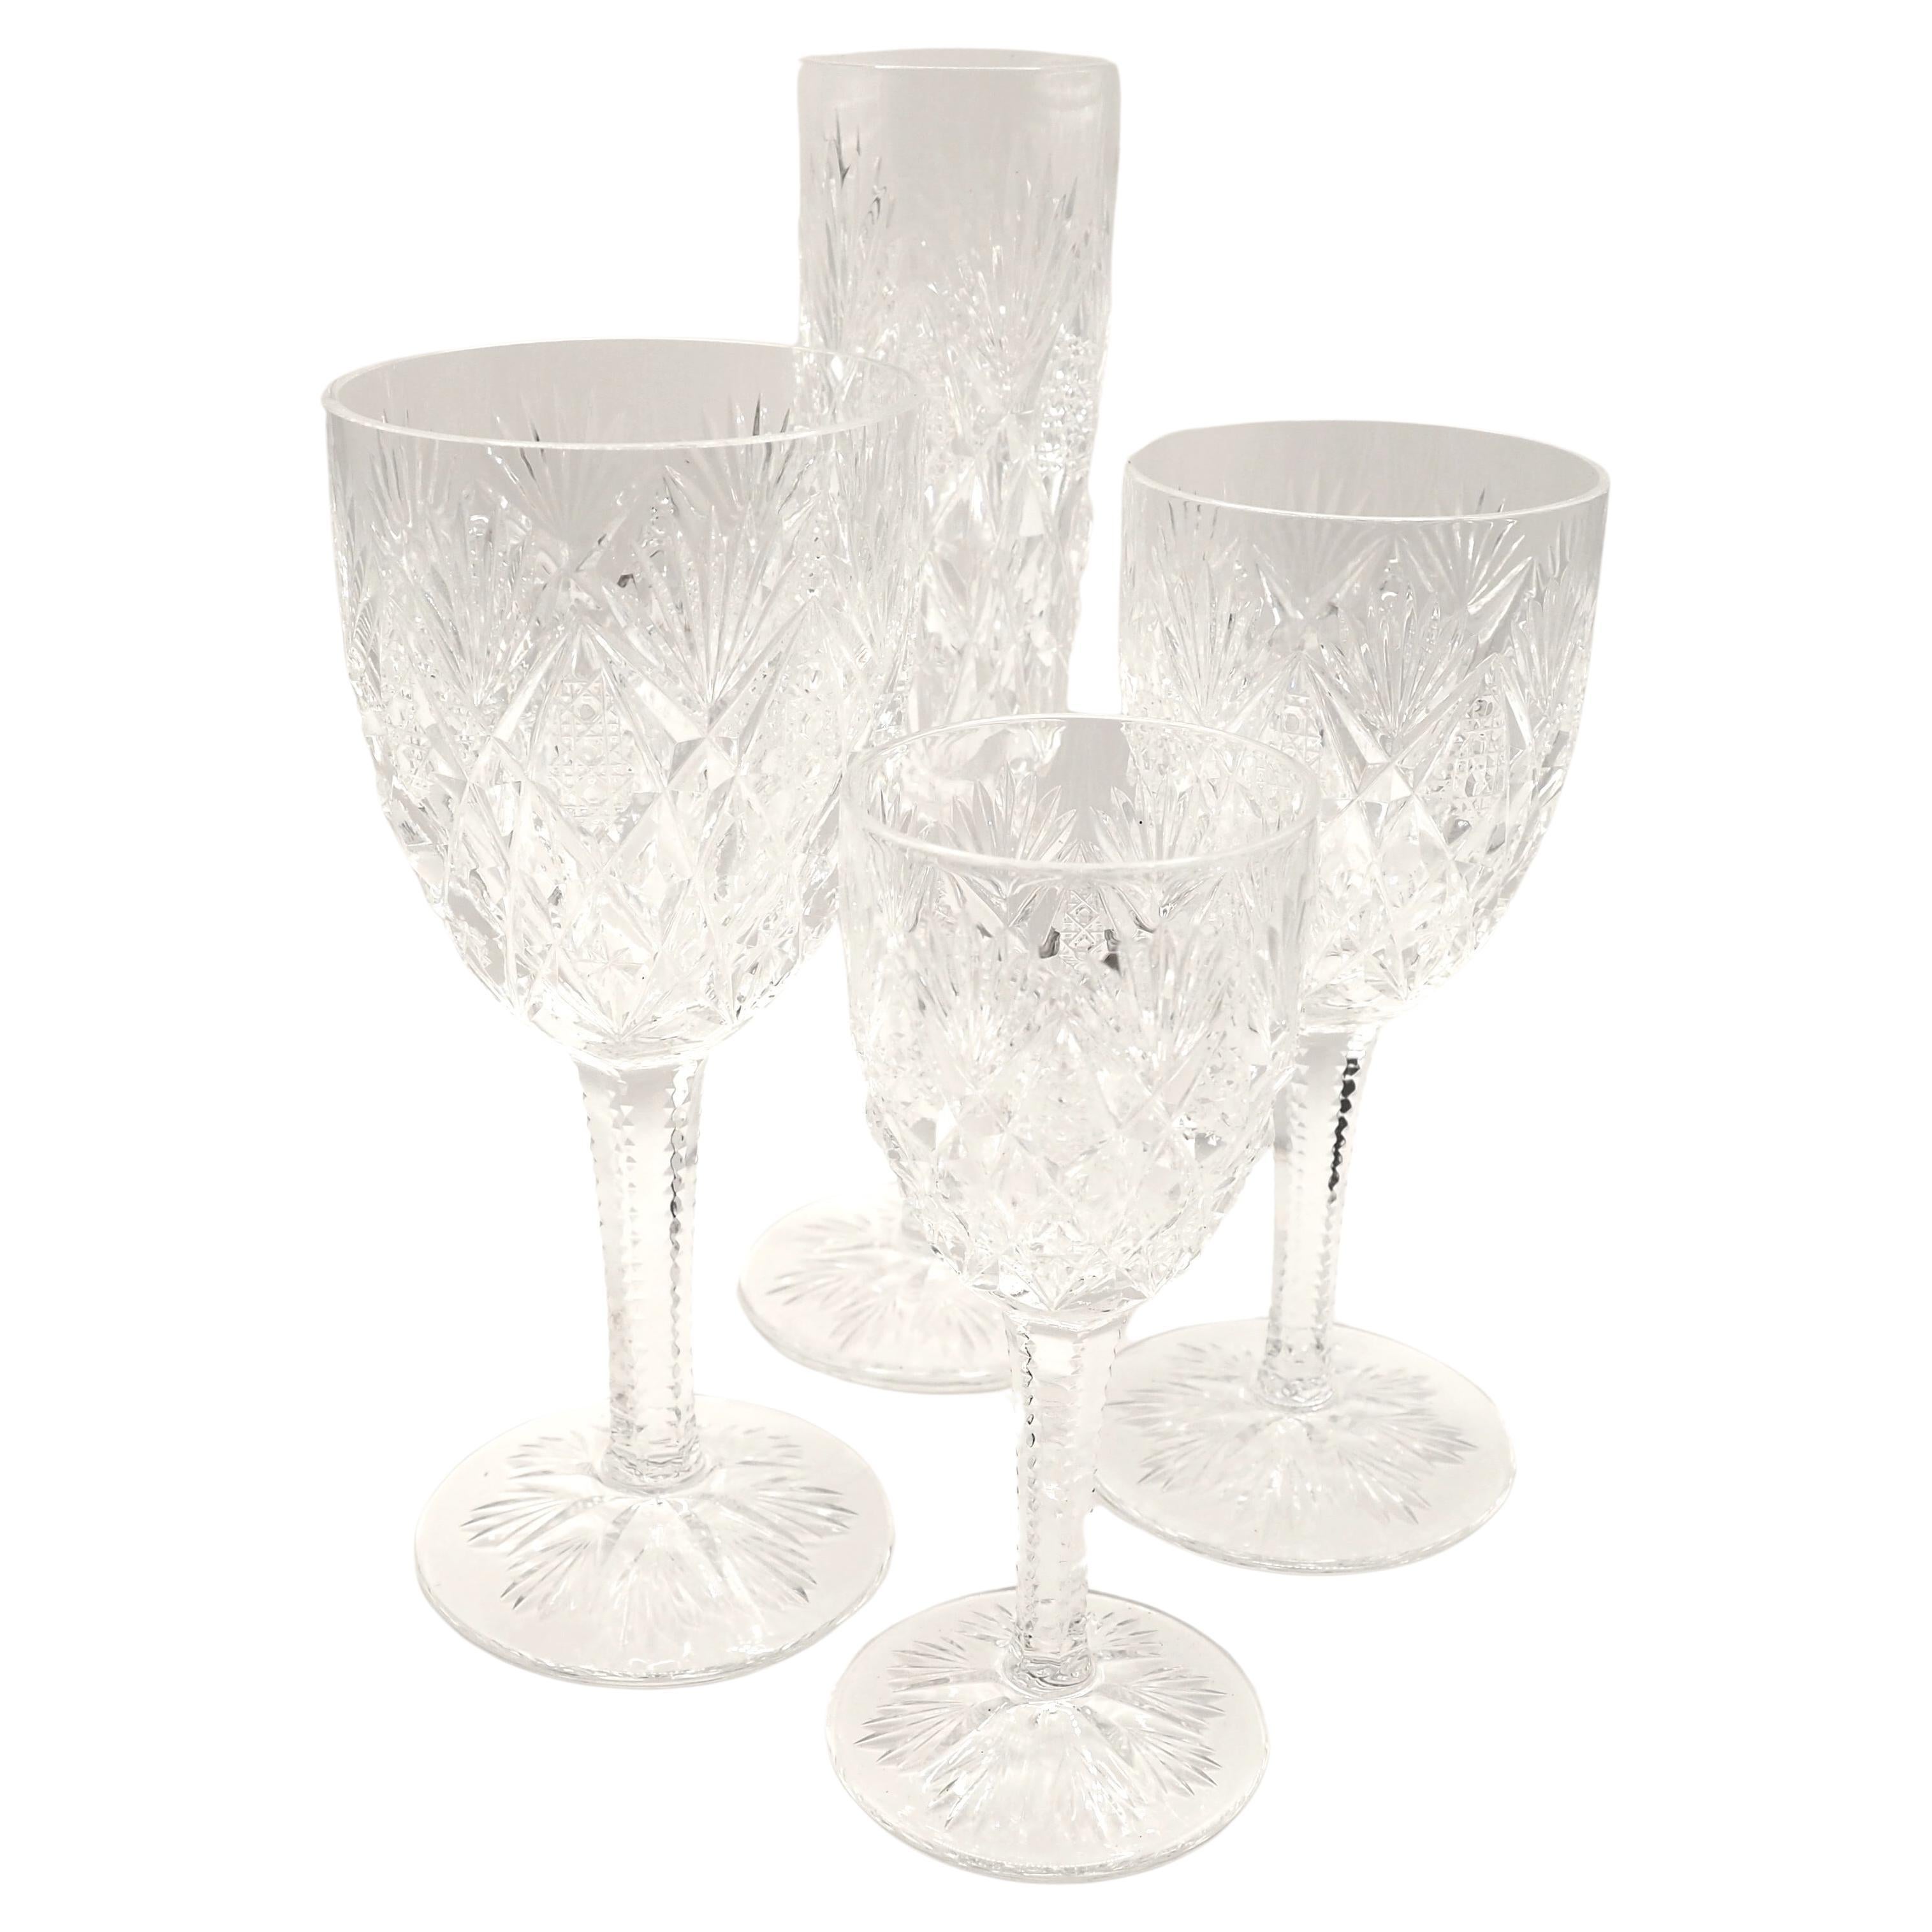 Set of 24 St Louis crystal glasses (6*4), Florence pattern - signed - 6 guests